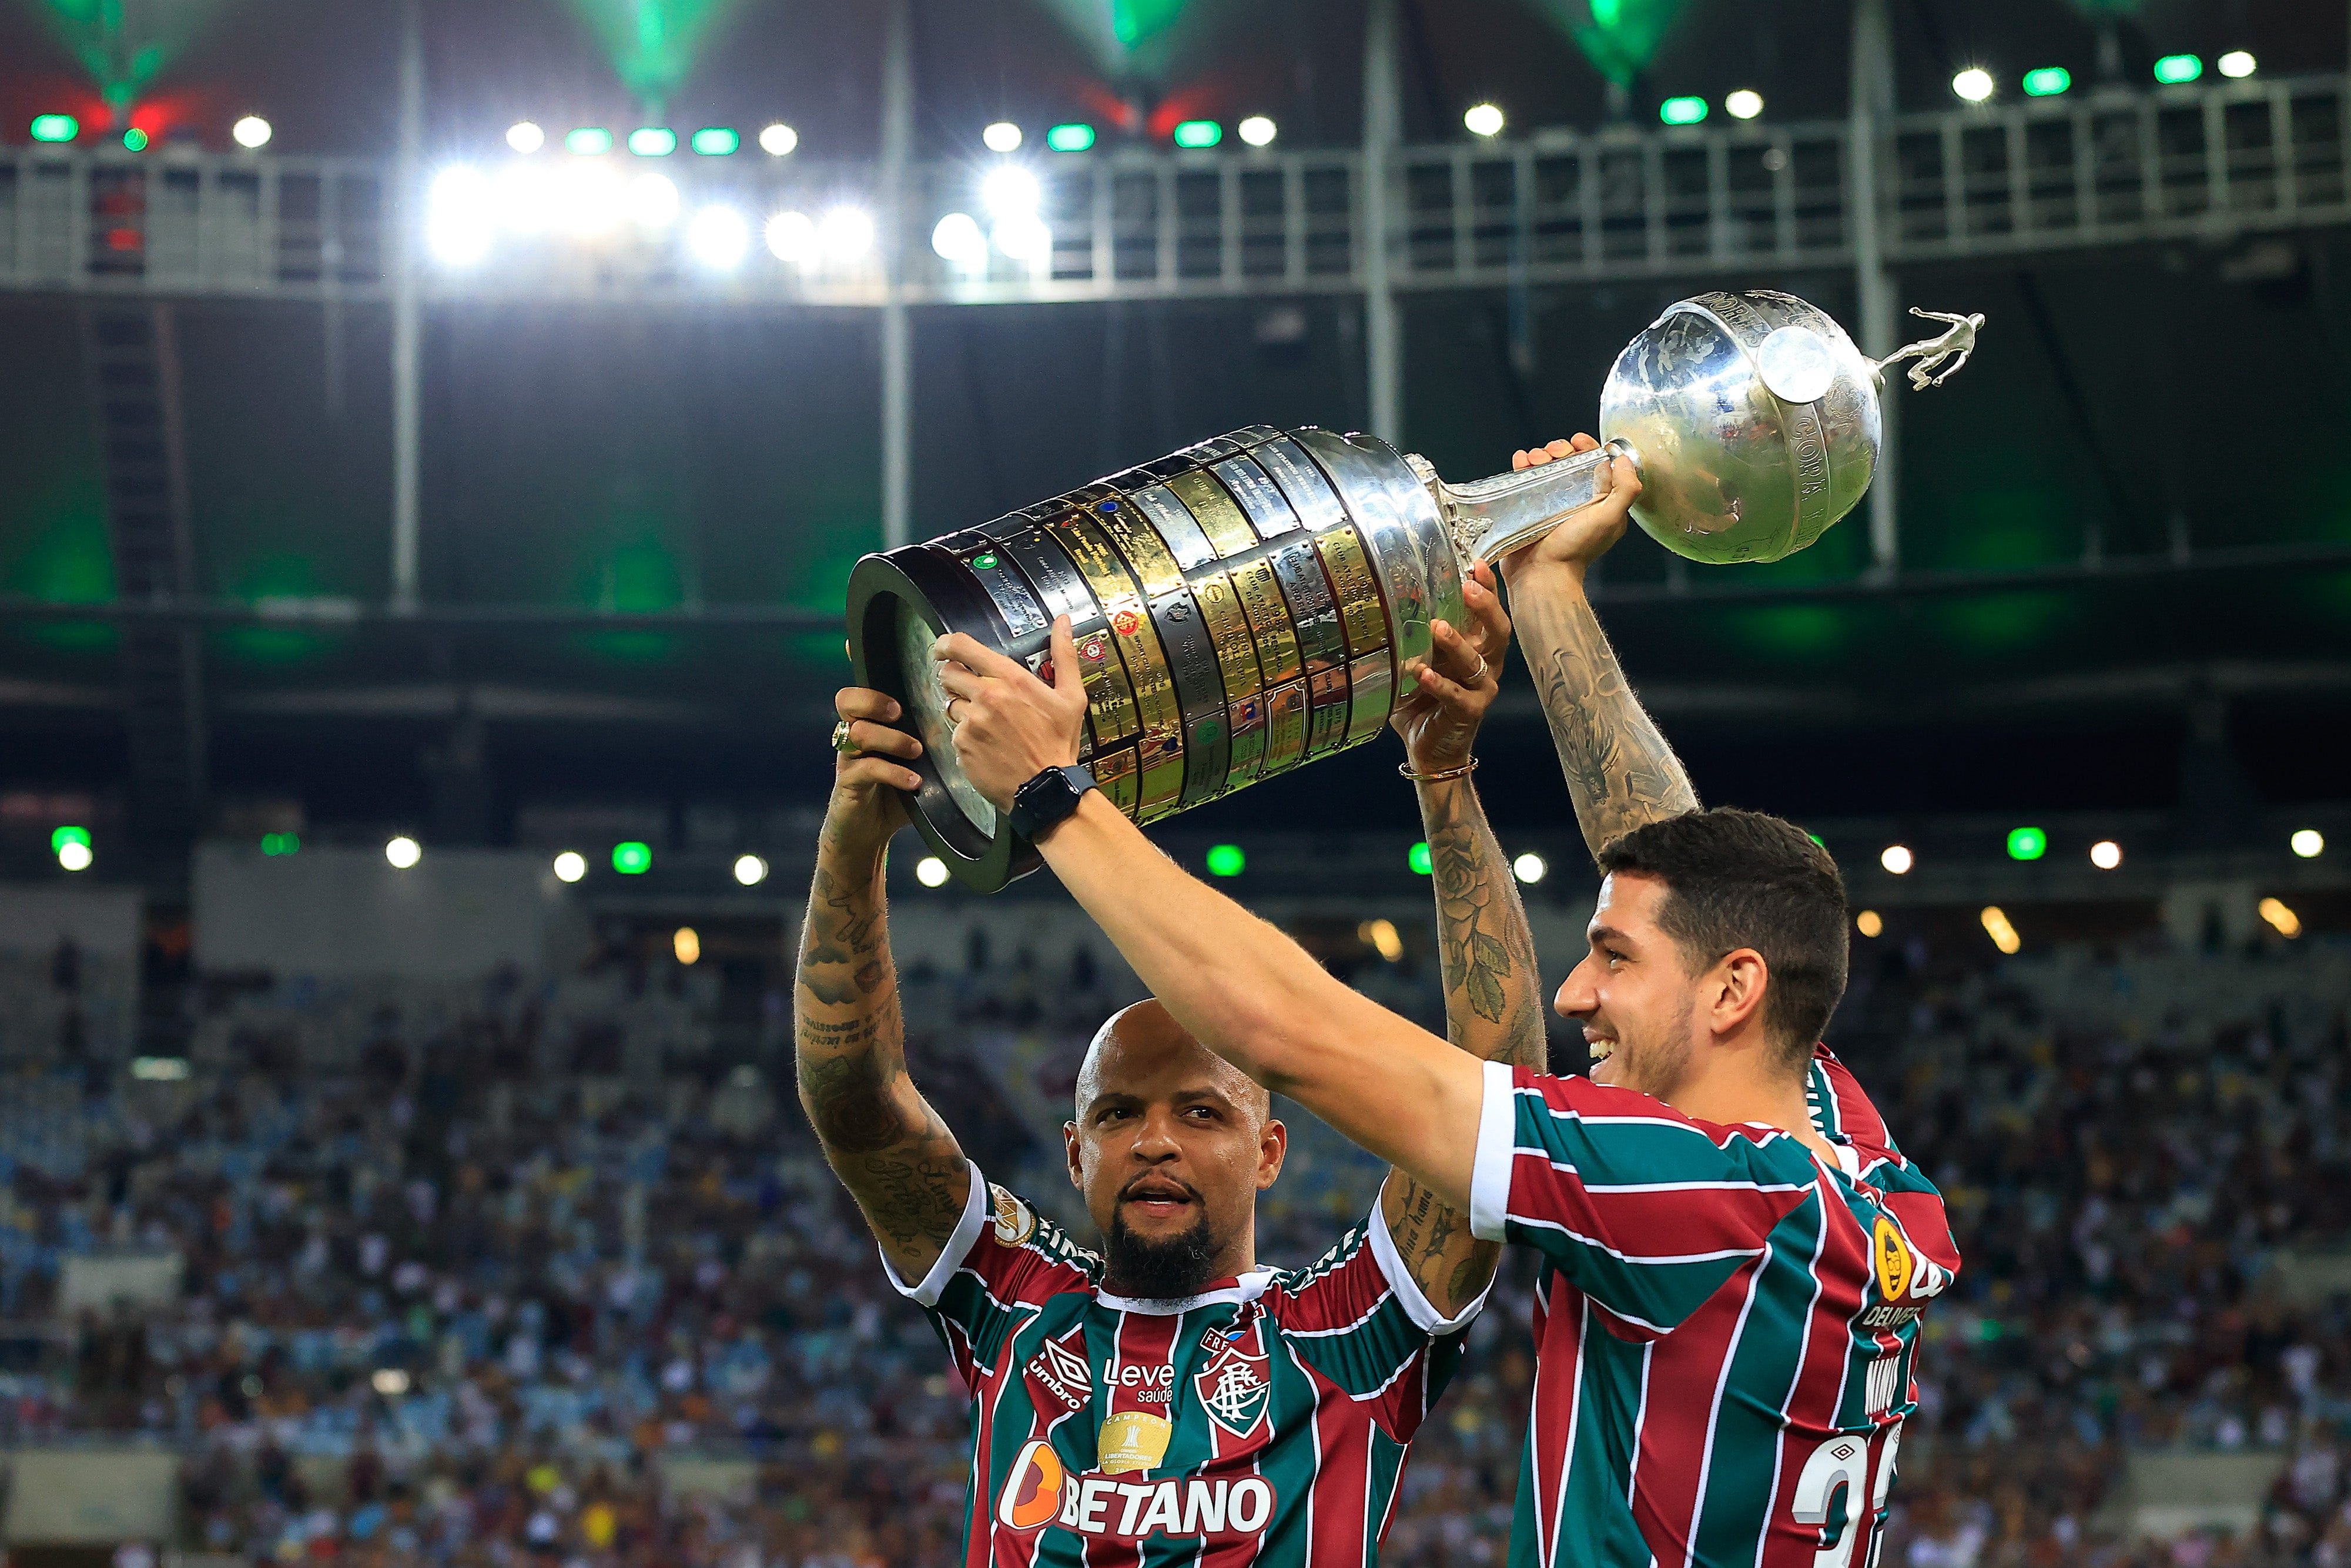 Their revolutionary way of playing helped Fluminense to win the Copa Libertadores in style